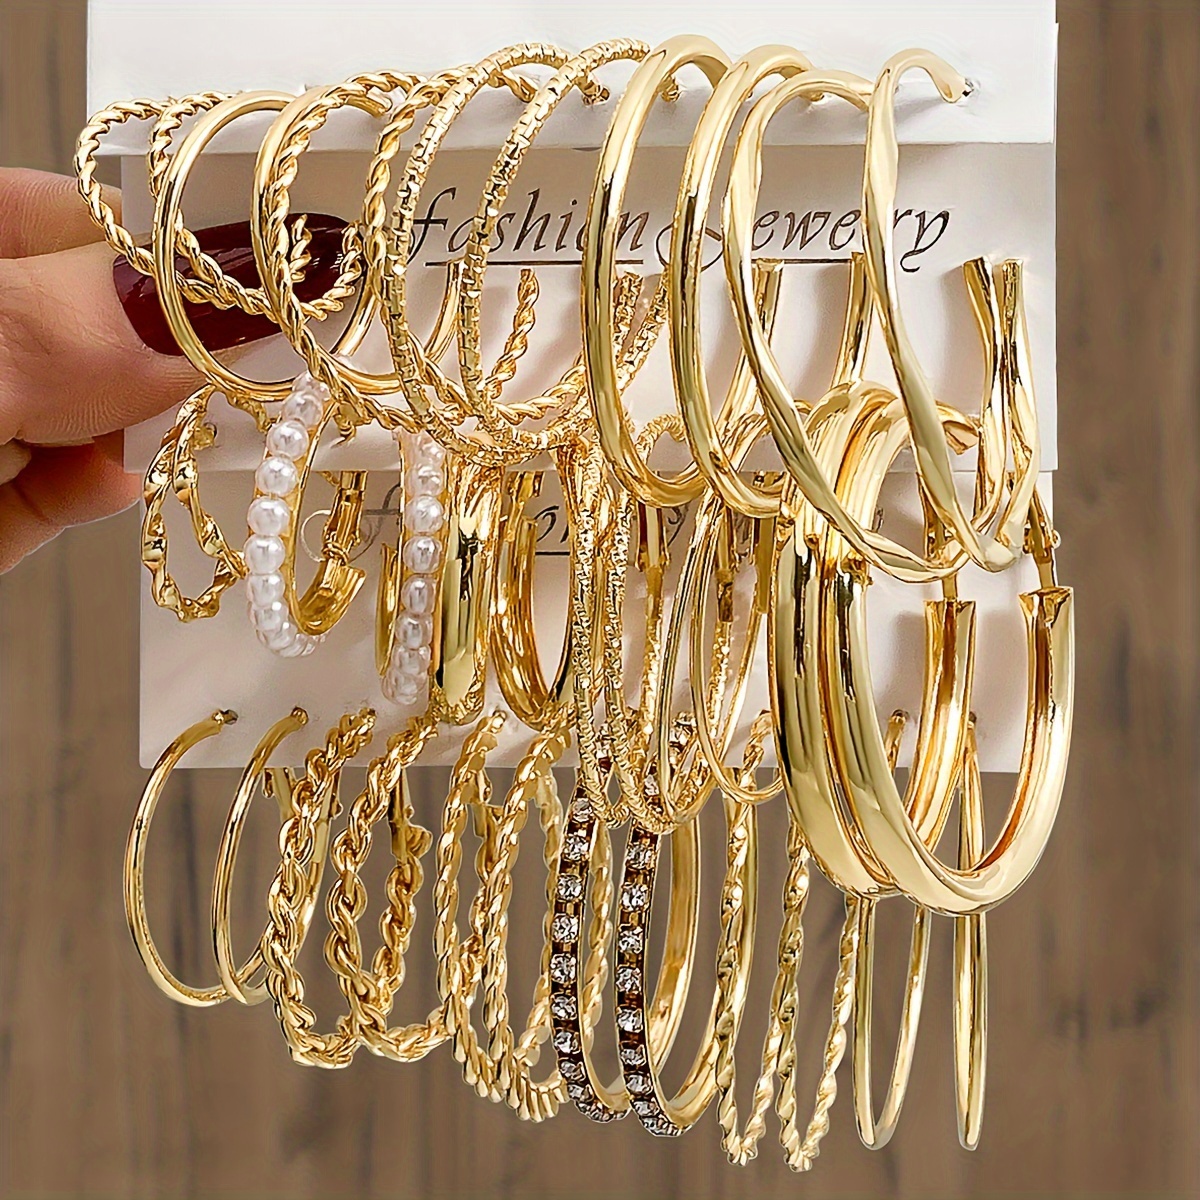 

18 Pairs Golden Metal, Faux Pearl & Crystal Embellished Large Hoop Earrings Set, Classic Style, Fashion Statement Jewelry For Women